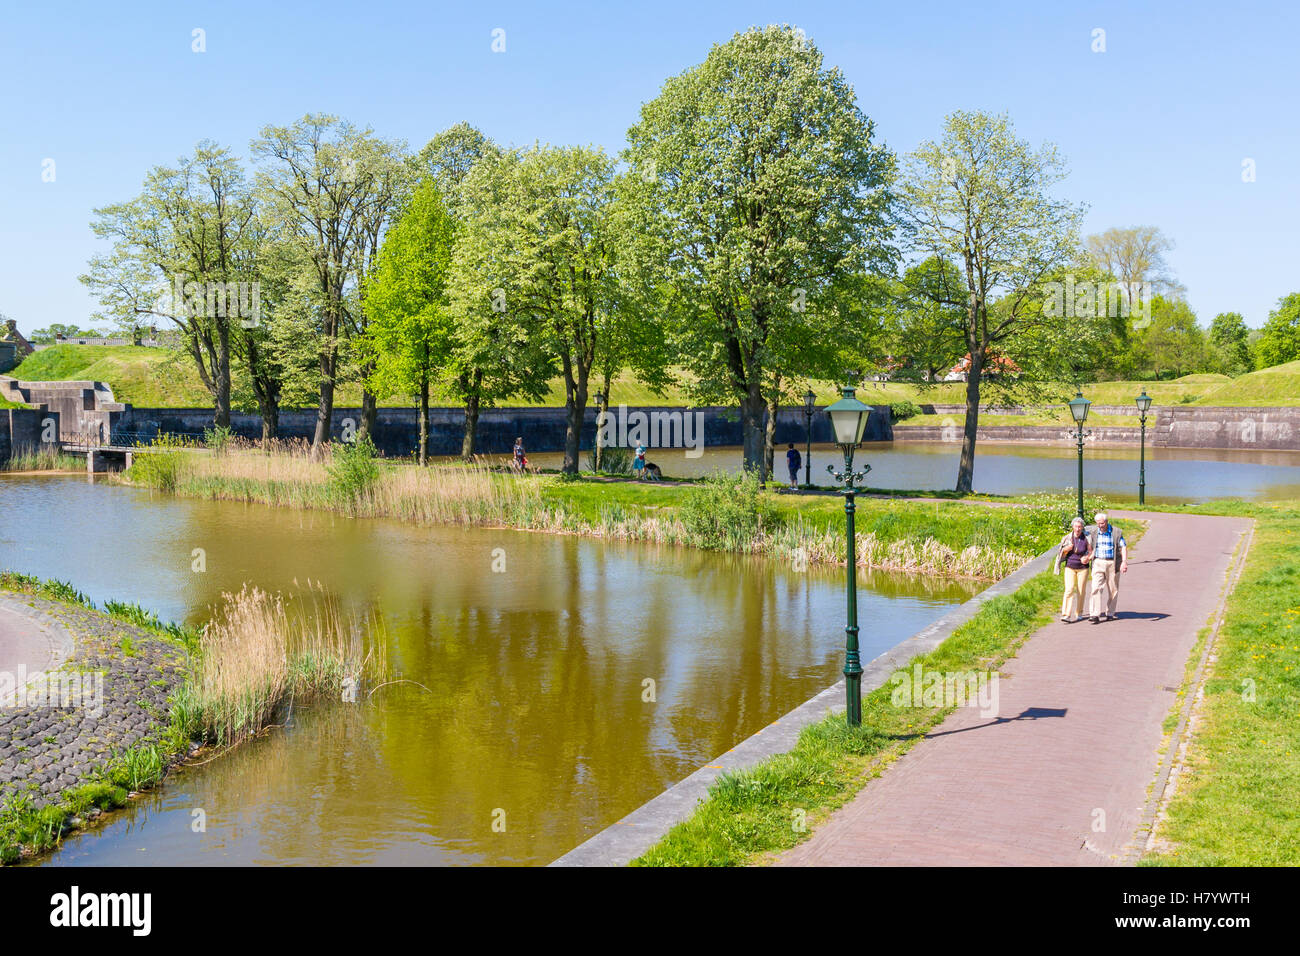 Active senior people walking and ramparts of old fortified town of Naarden, North Holland, Netherlands Stock Photo